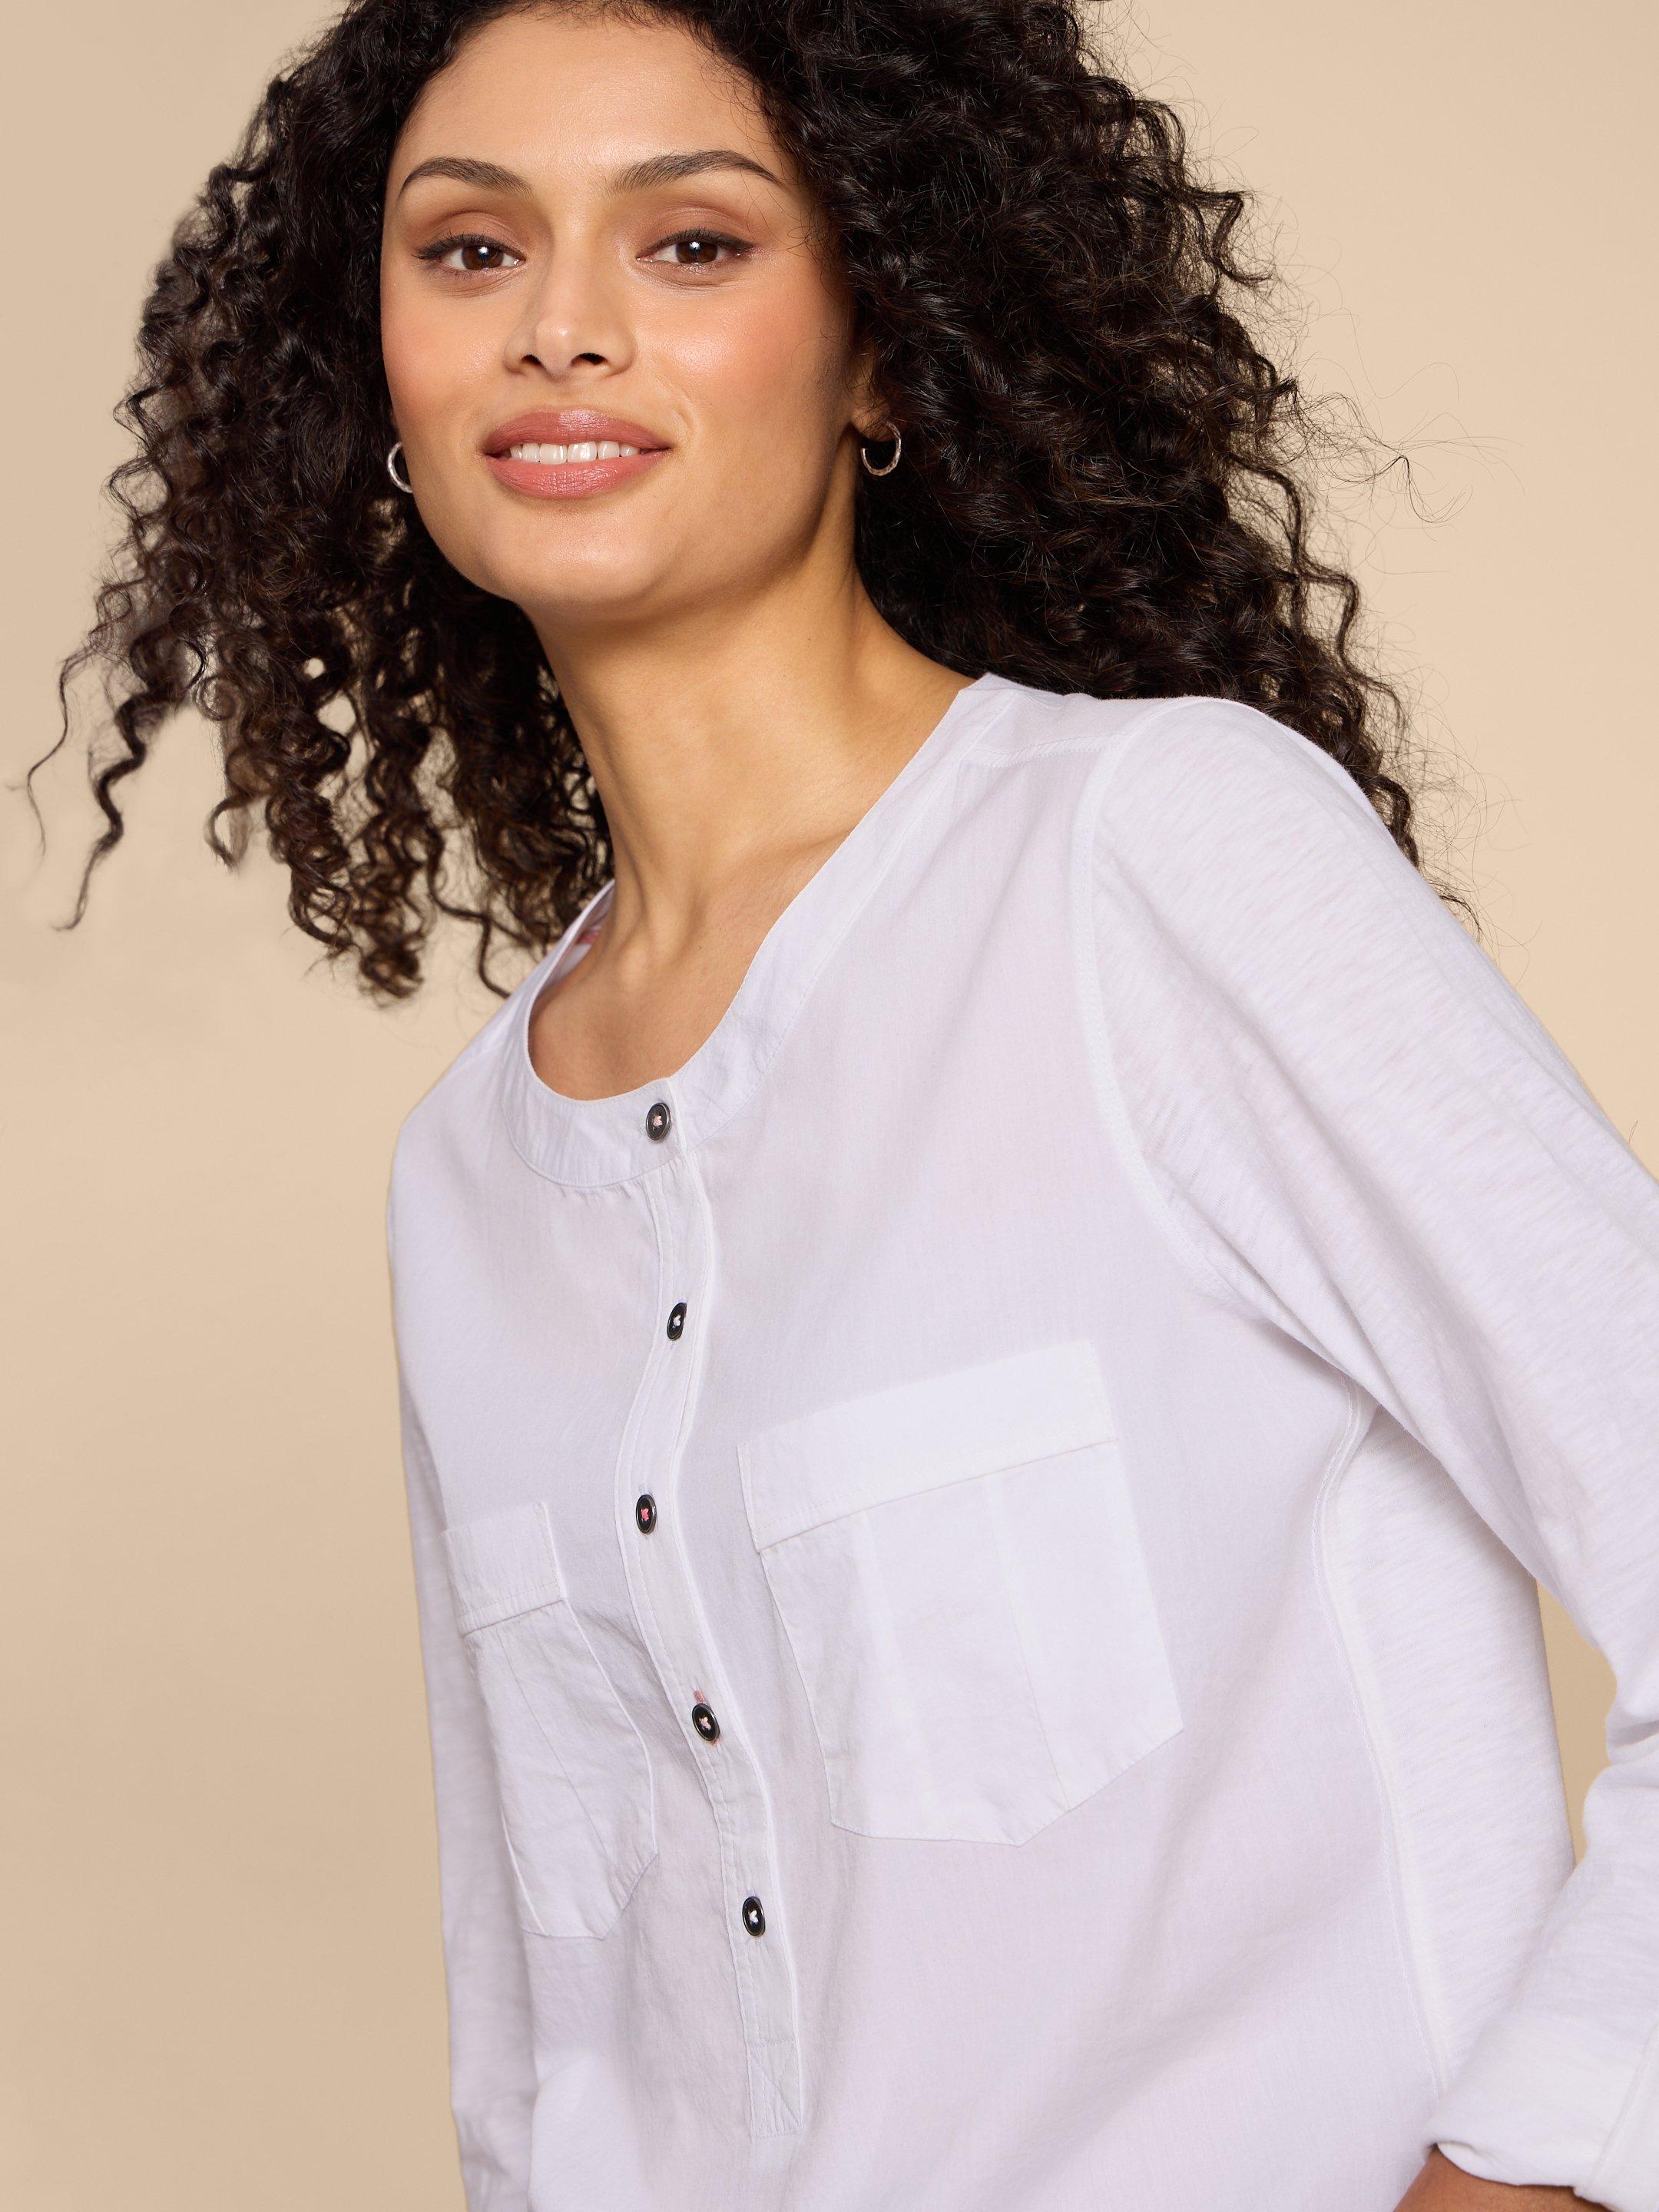 MACLEY MIX SHIRT in PALE IVORY - MODEL DETAIL